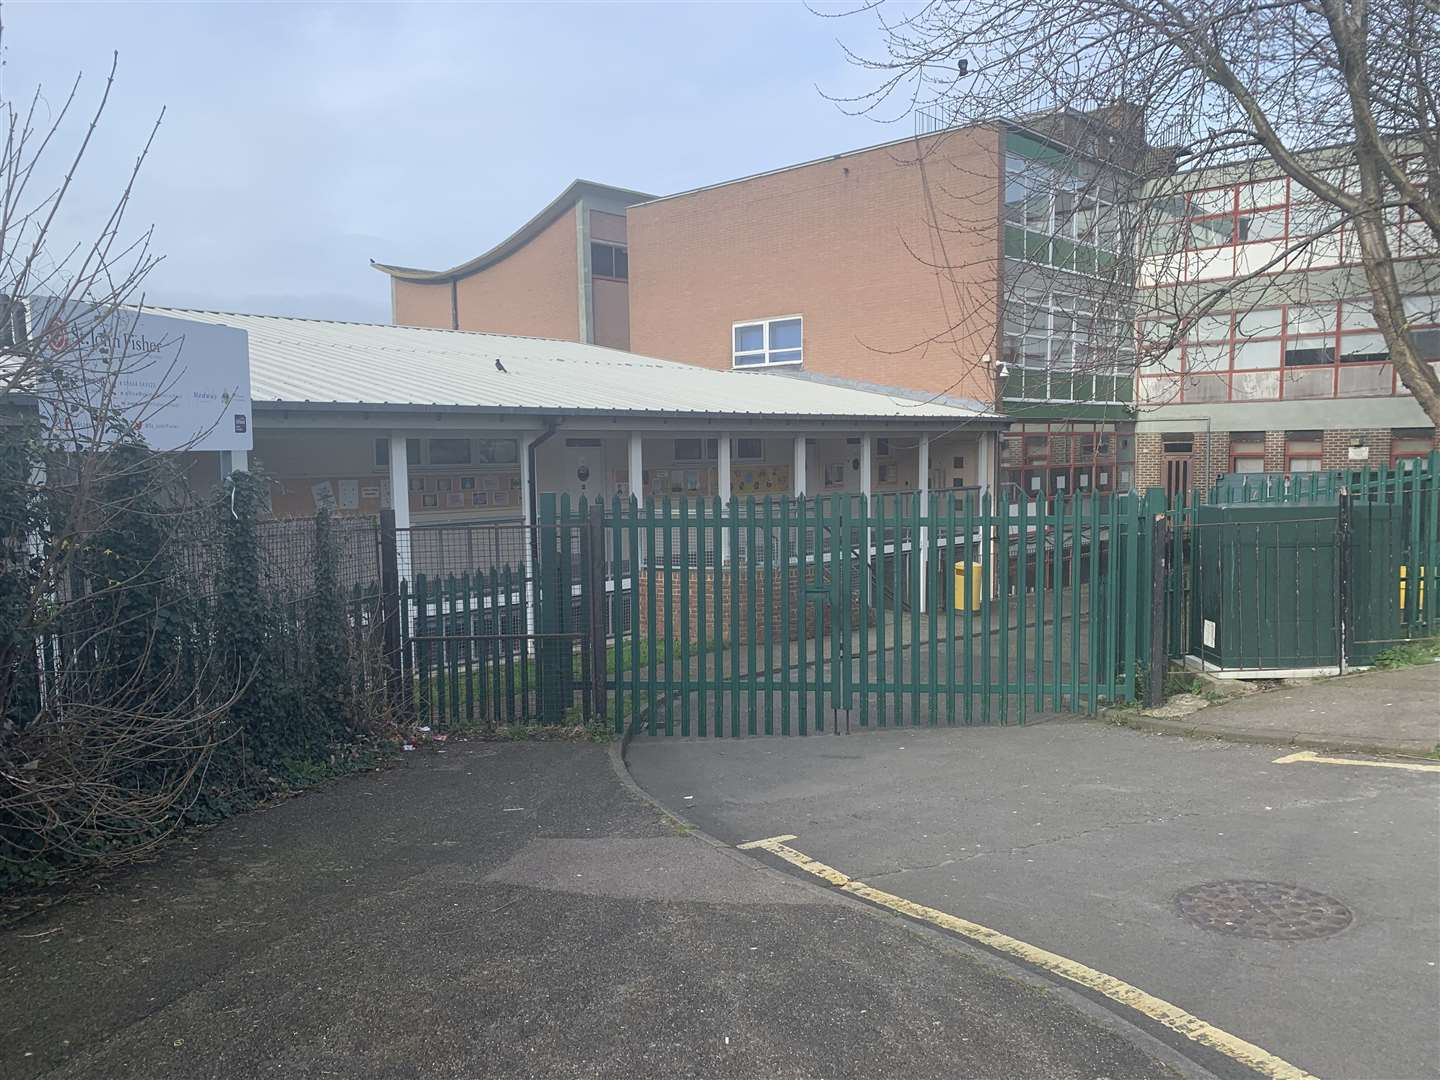 St John Fisher School in Chatham closed its doors to allow for a deep clean